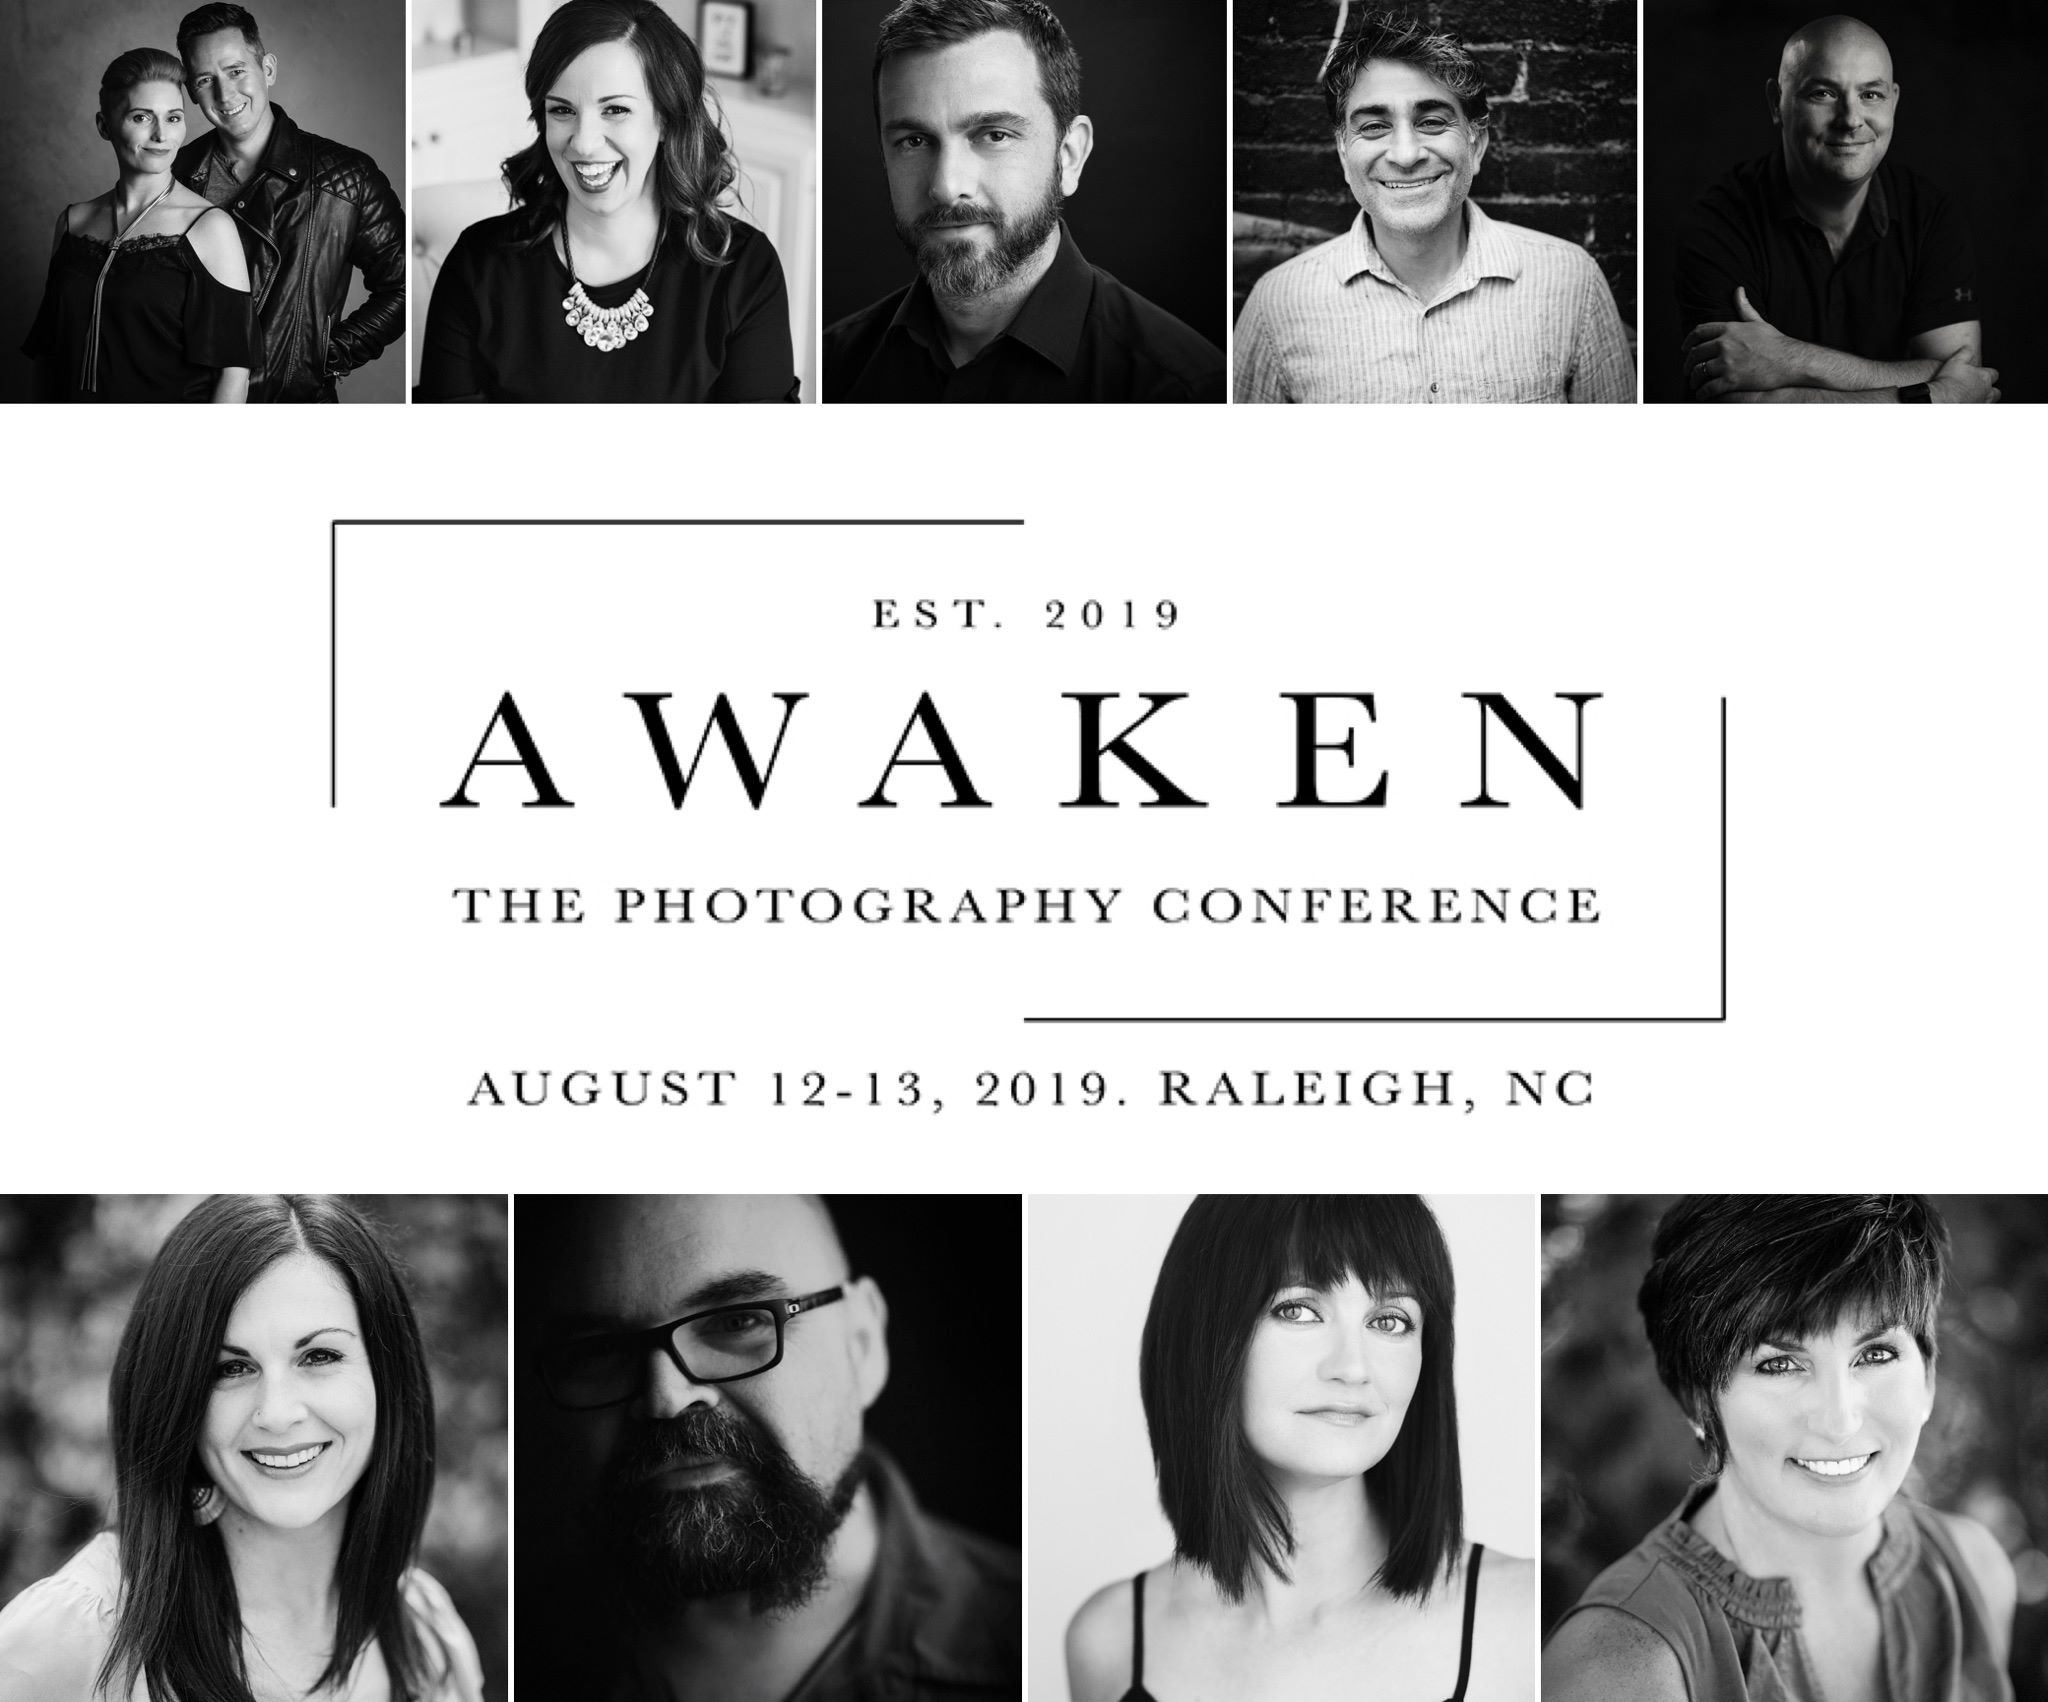 Awaken: The Photography Conference